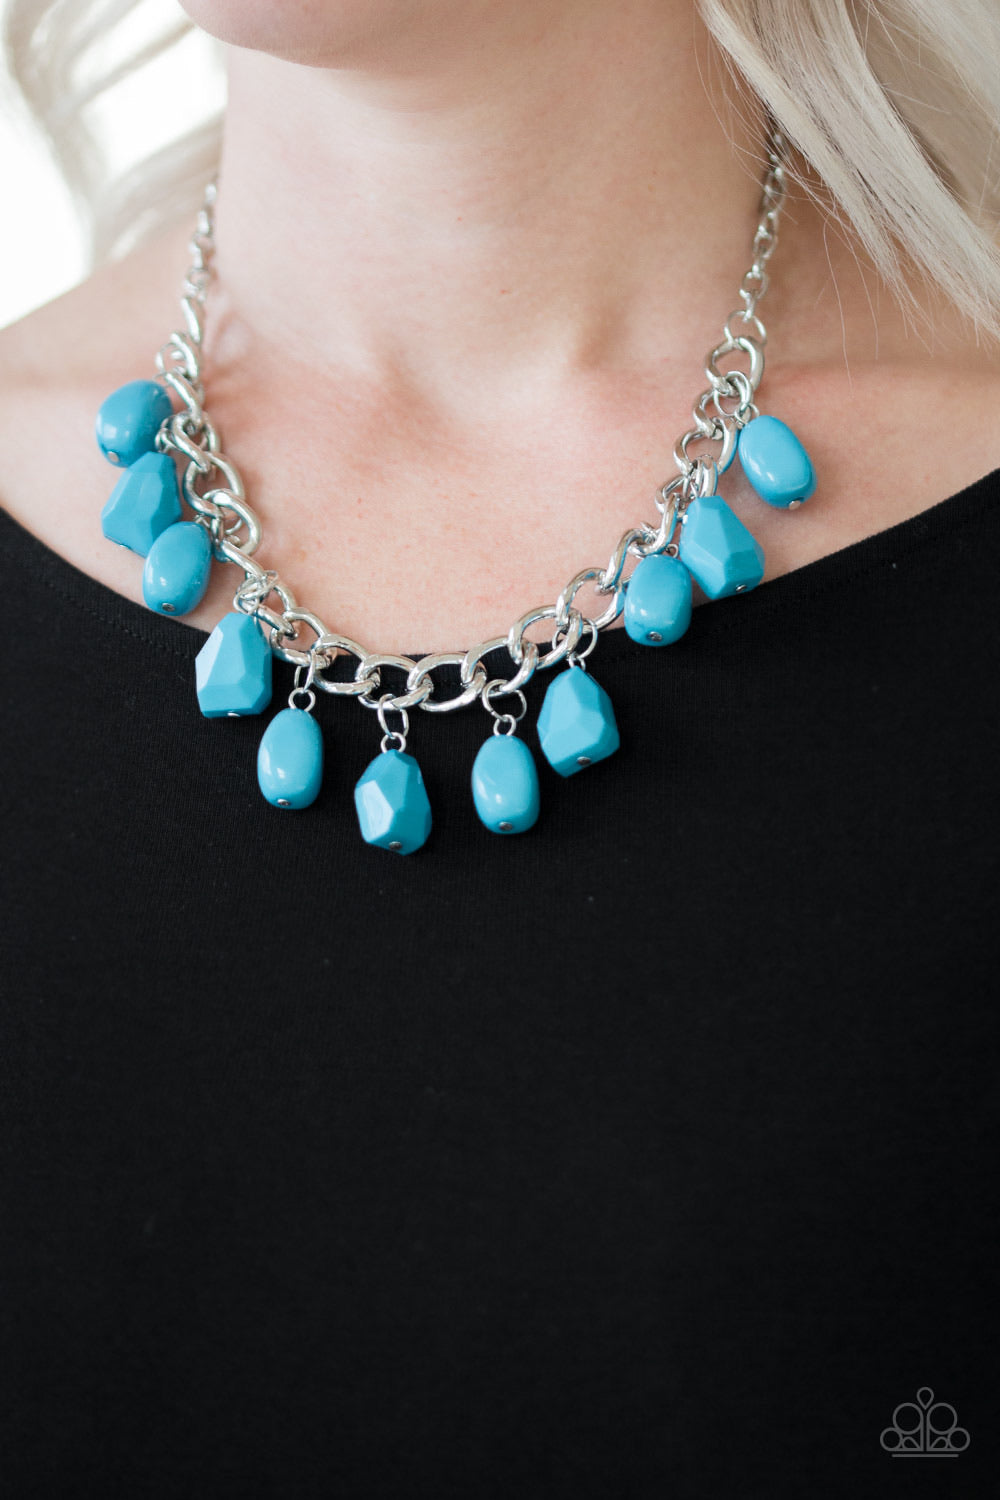 Take The COLOR Wheel! - Blue Necklace 861